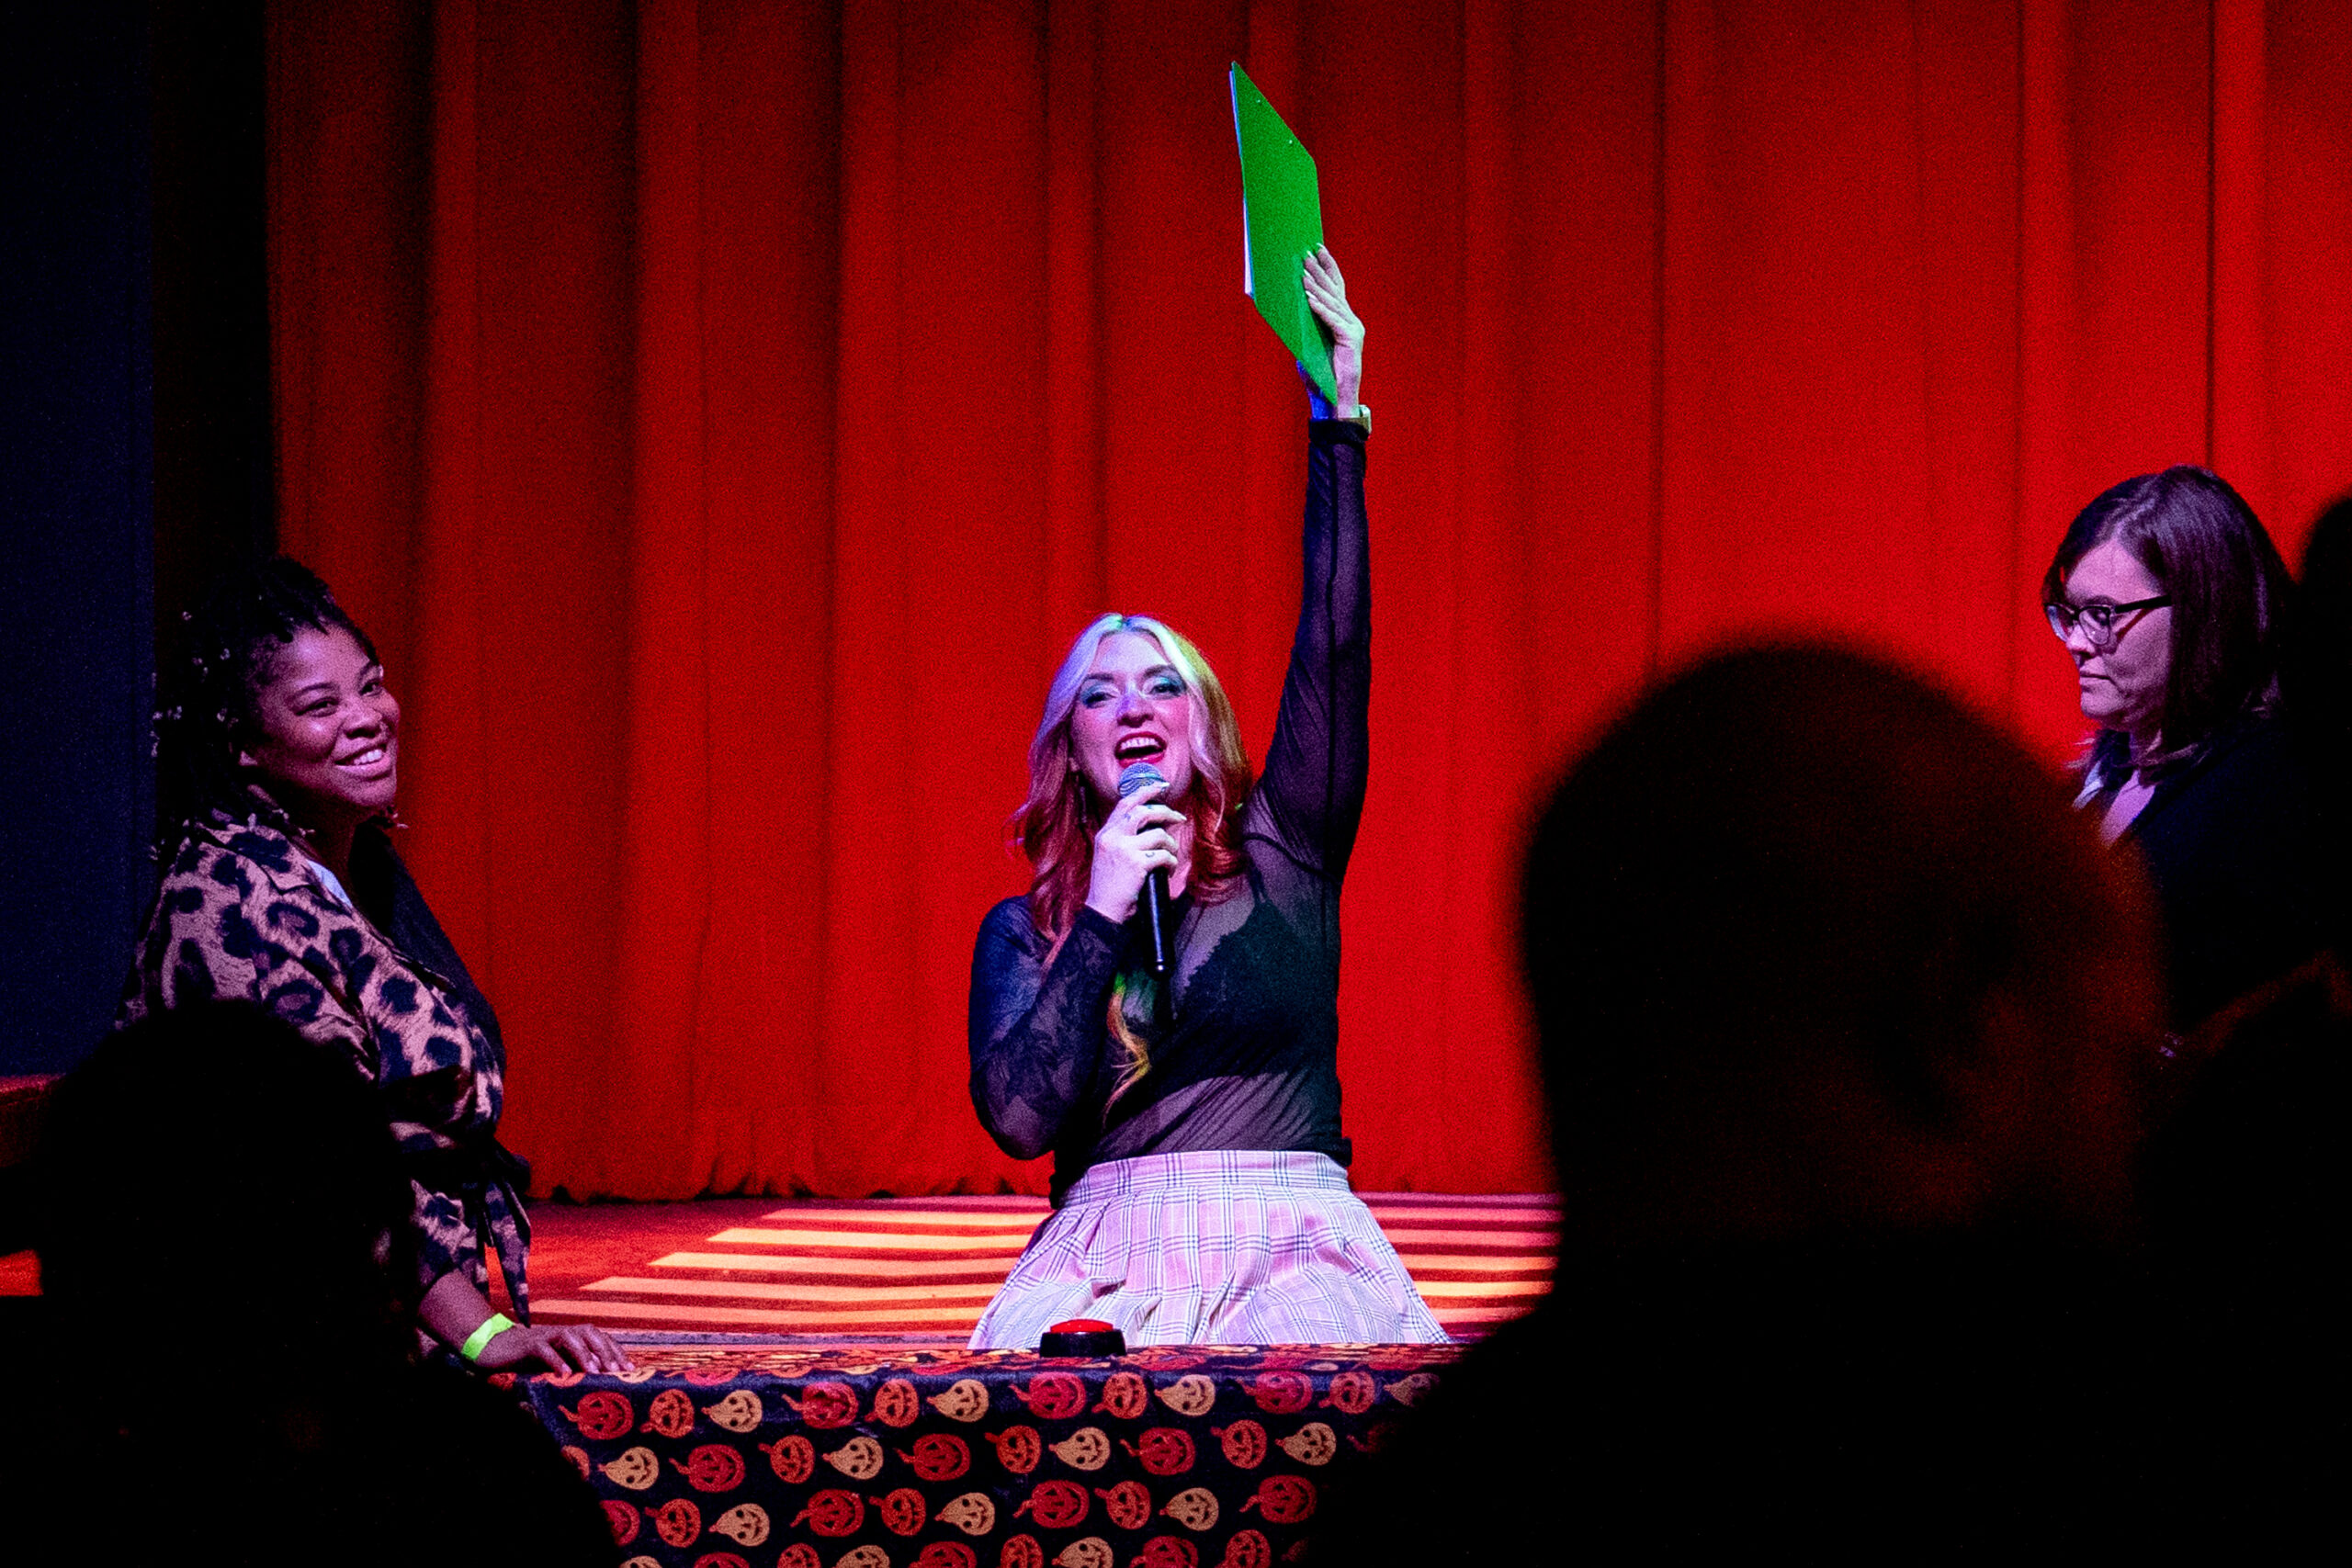 A white woman sitting in front of a table raises a green clipboard above her head in front of a stage with two smiling game participants on each side of the table.